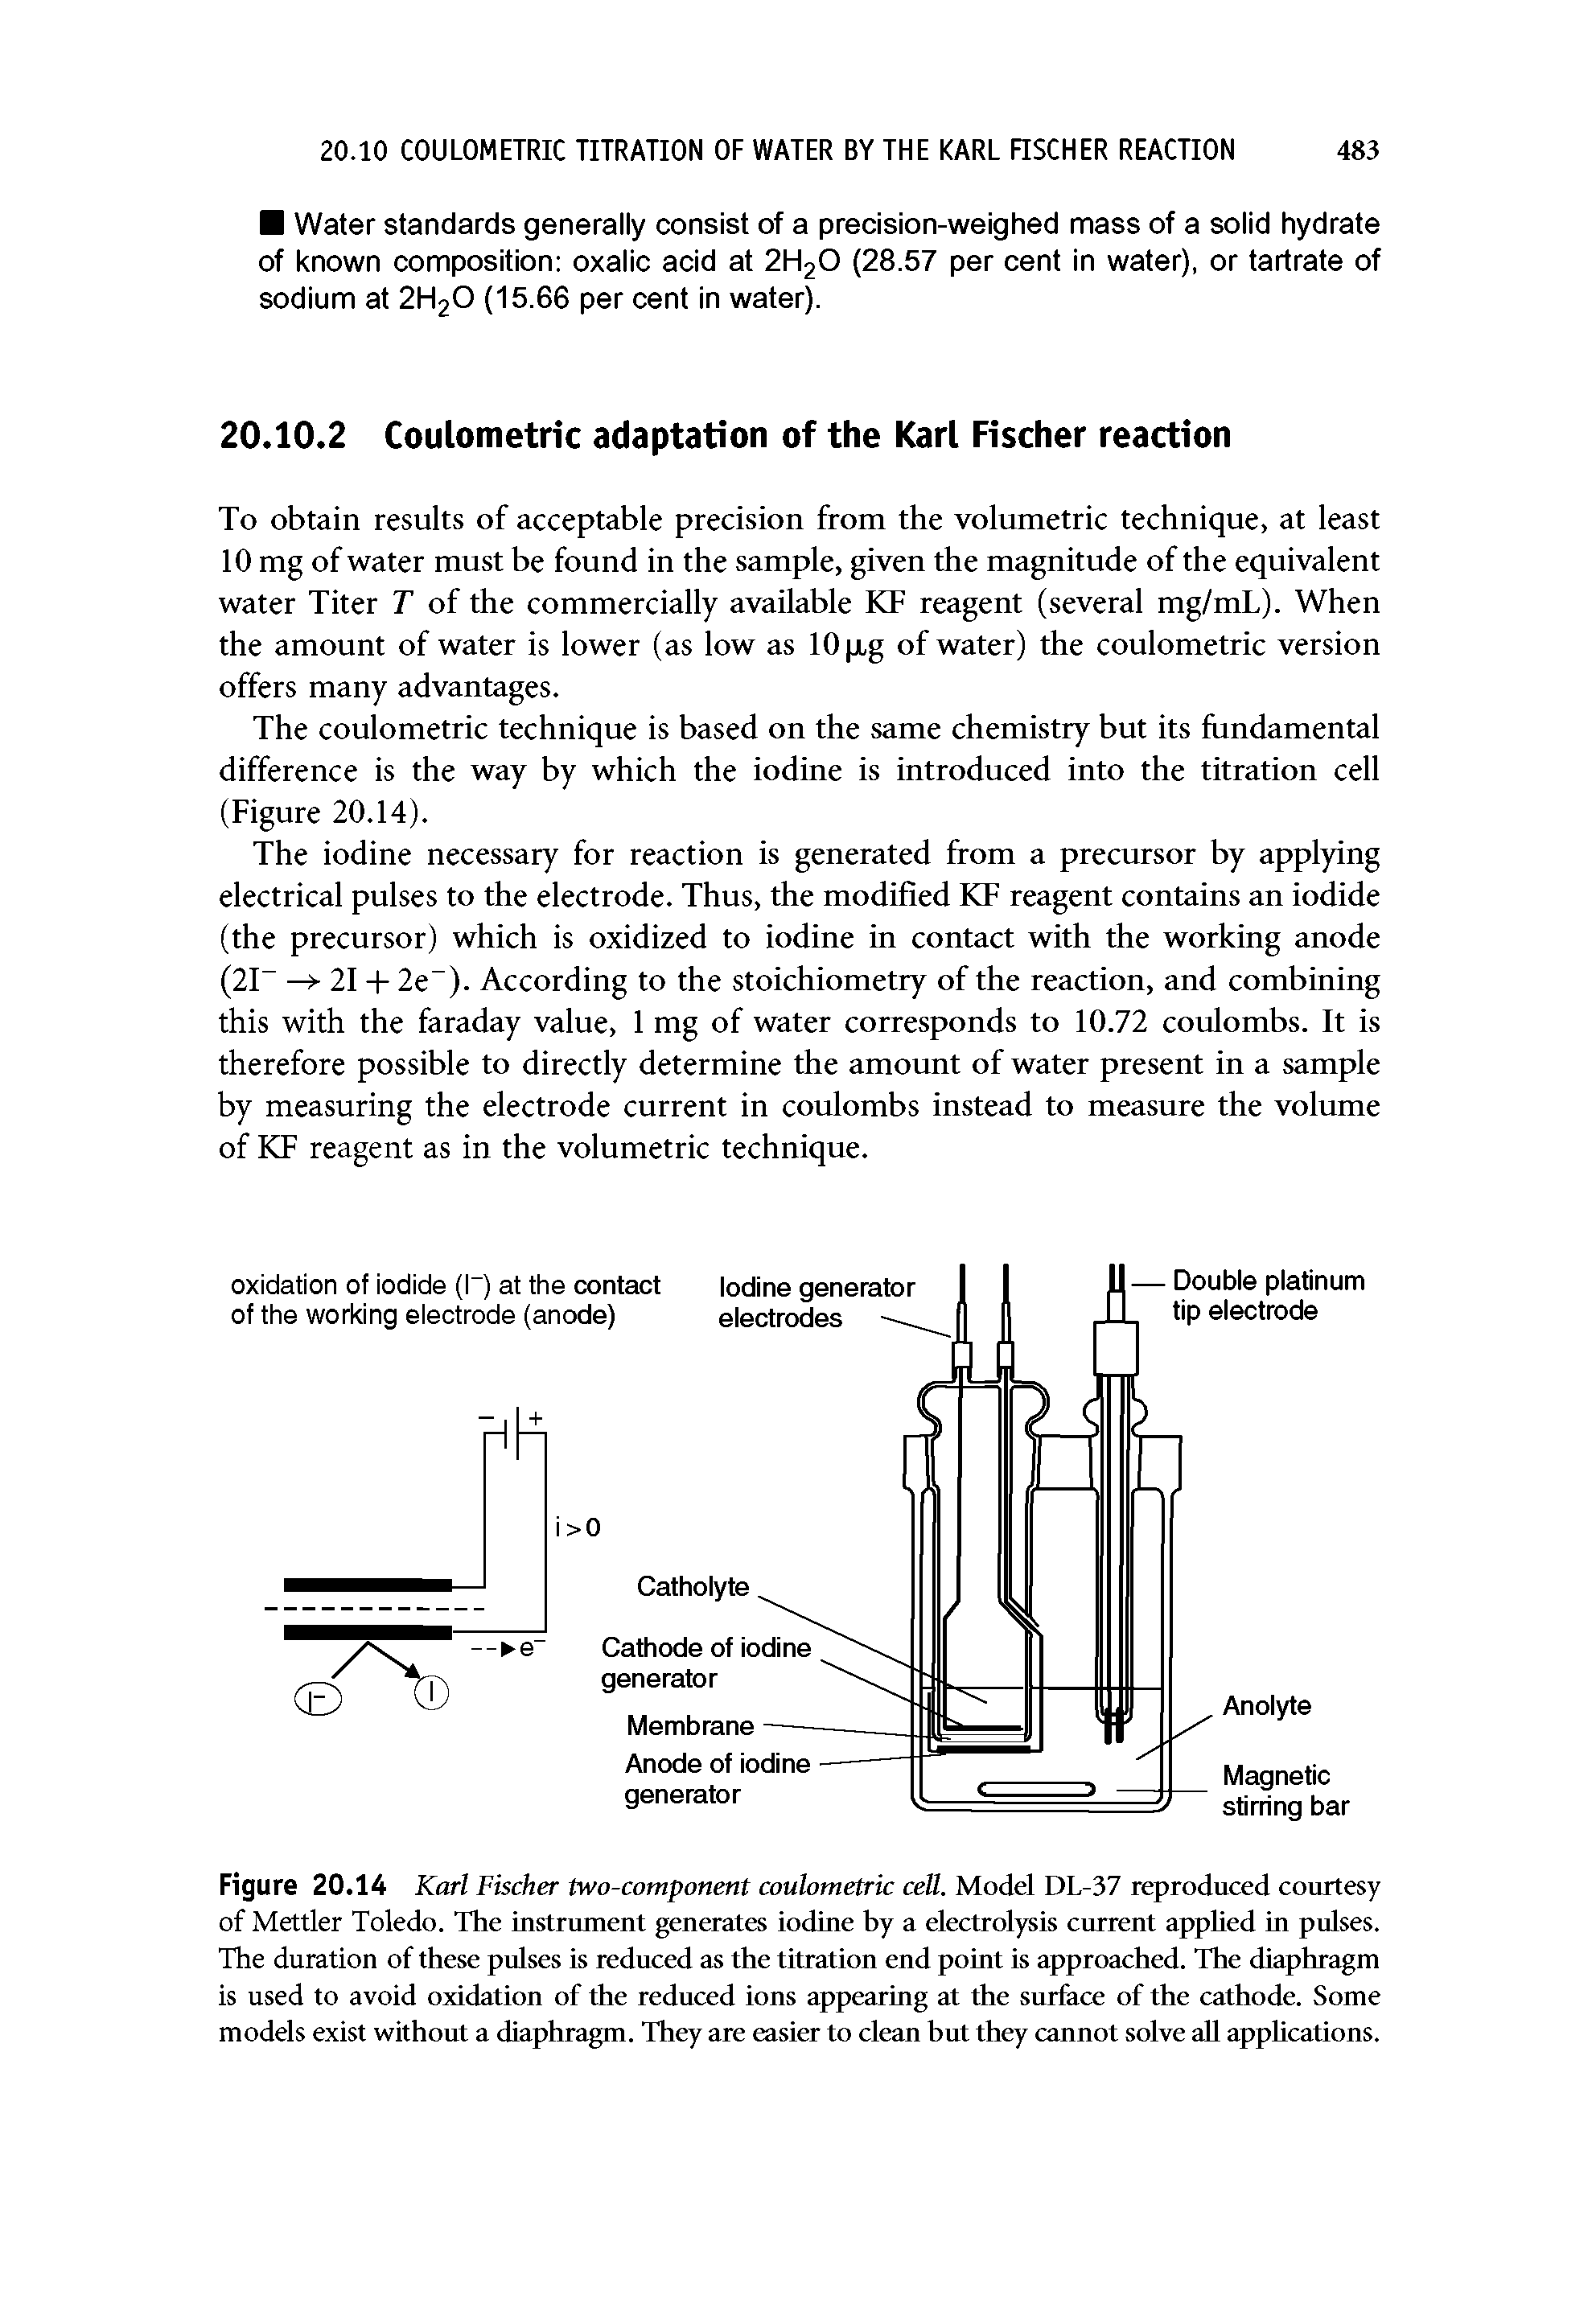 Figure 20.14 Karl Fischer two-component coulometric cell. Model DL-37 reproduced courtesy of Mettler Toledo. The instrument generates iodine by a electrolysis current appUed in pulses. The duration of these pulses is reduced as the titration end point is approached. The diaphragm is used to avoid oxidation of the reduced ions appearing at the surface of the cathode. Some models exist without a diaphragm. They are easier to clean but they cannot solve all apphcations.